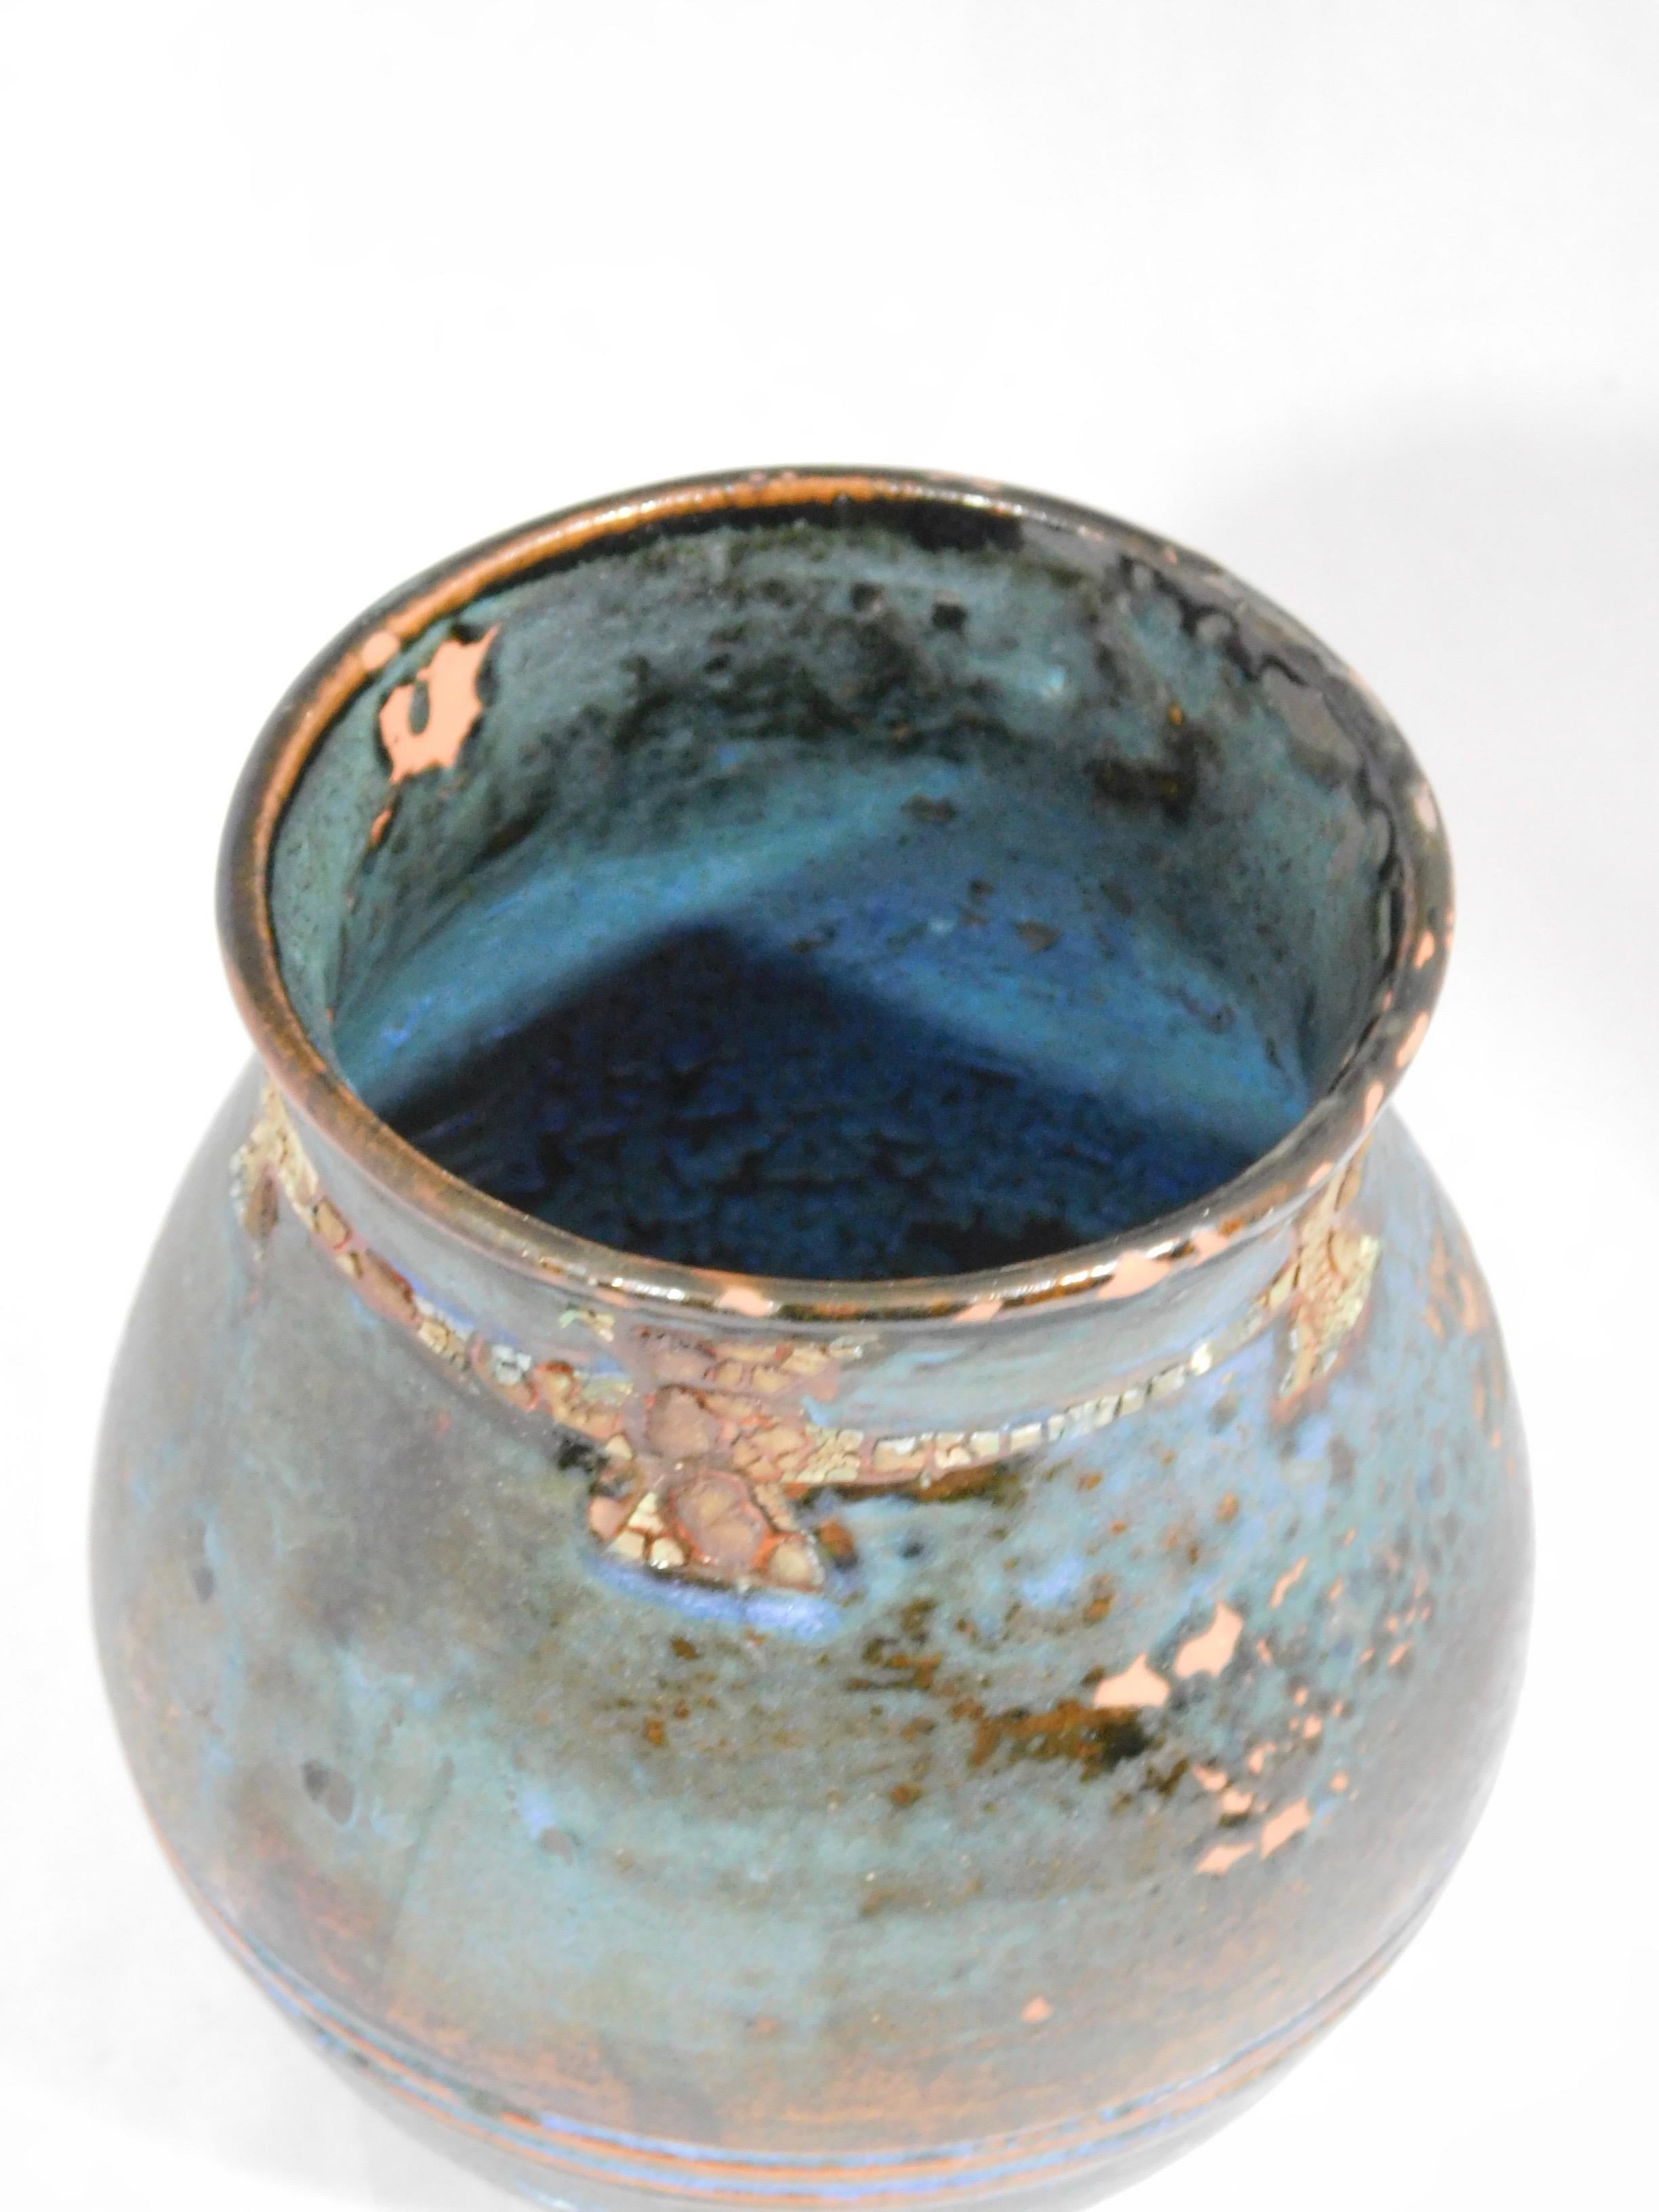 Wheel thrown Eagle Rock earthenware vessel by ceramicist Andrew Wilder. This is a one of a kind object made in the ancient way- by hand in a small artisanal pottery. In this series Wilder explores the application of lichen under glazes to achieve